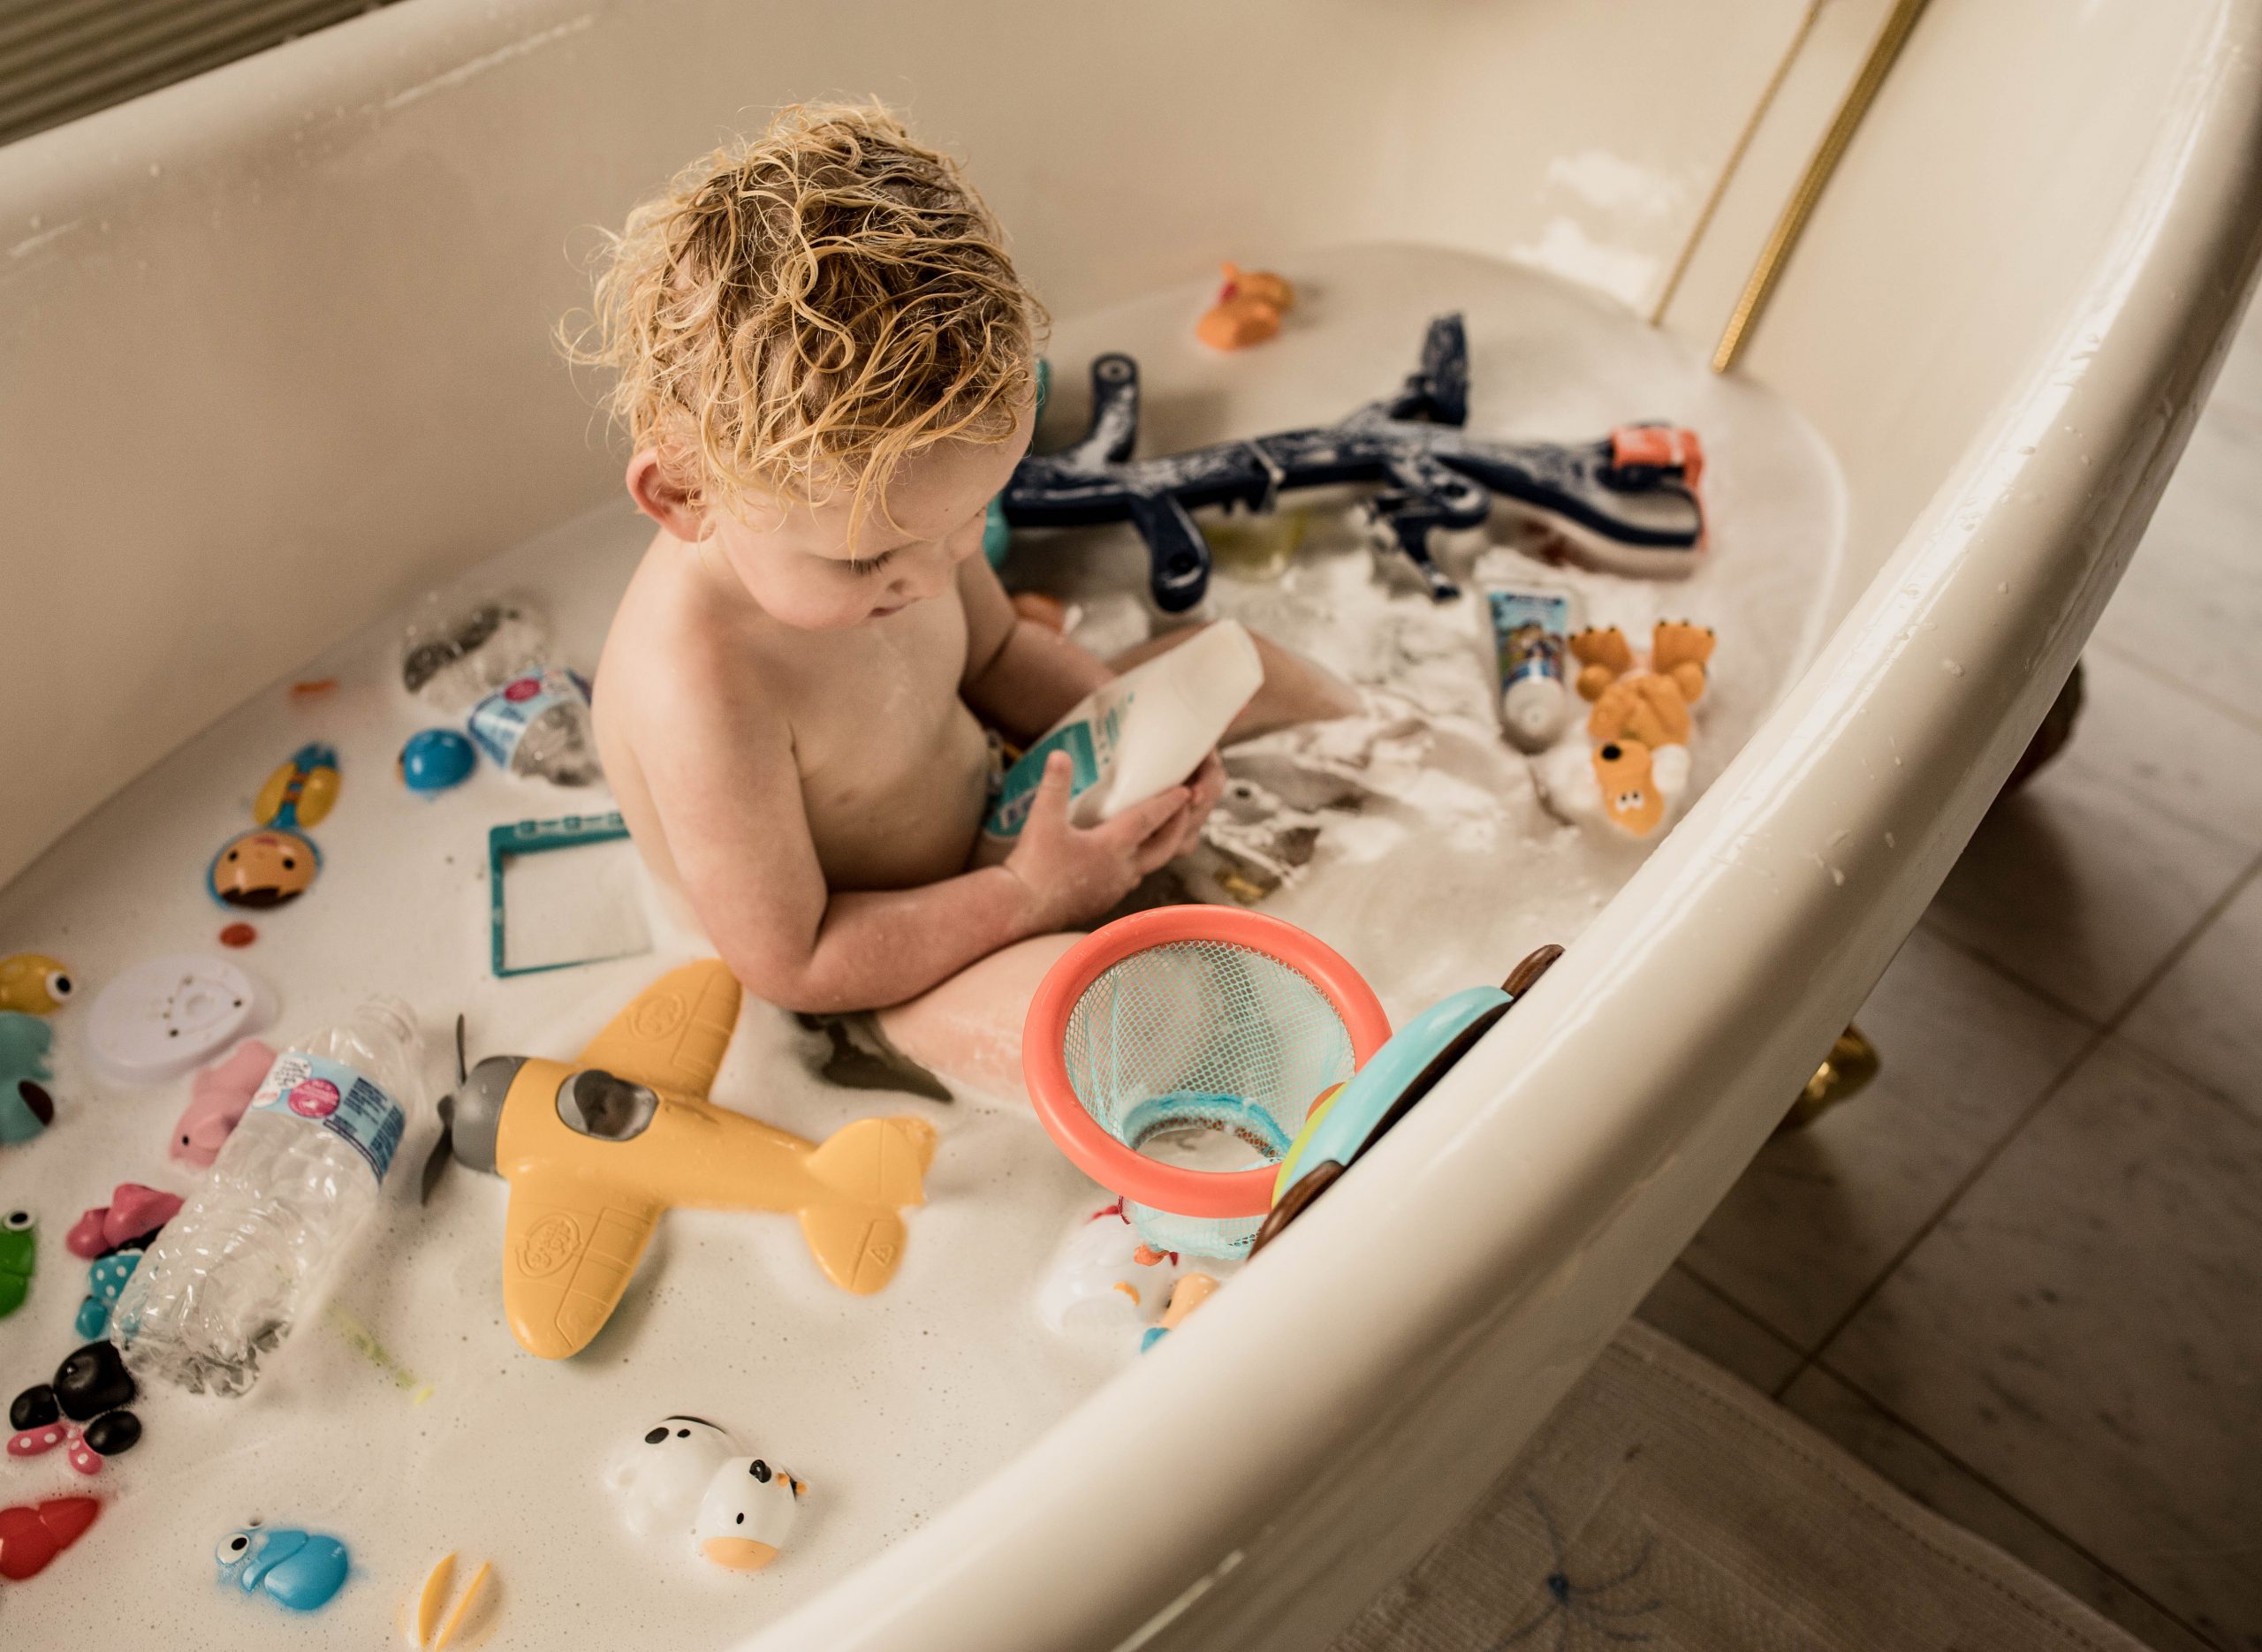 Toddler playing in the bathtub 